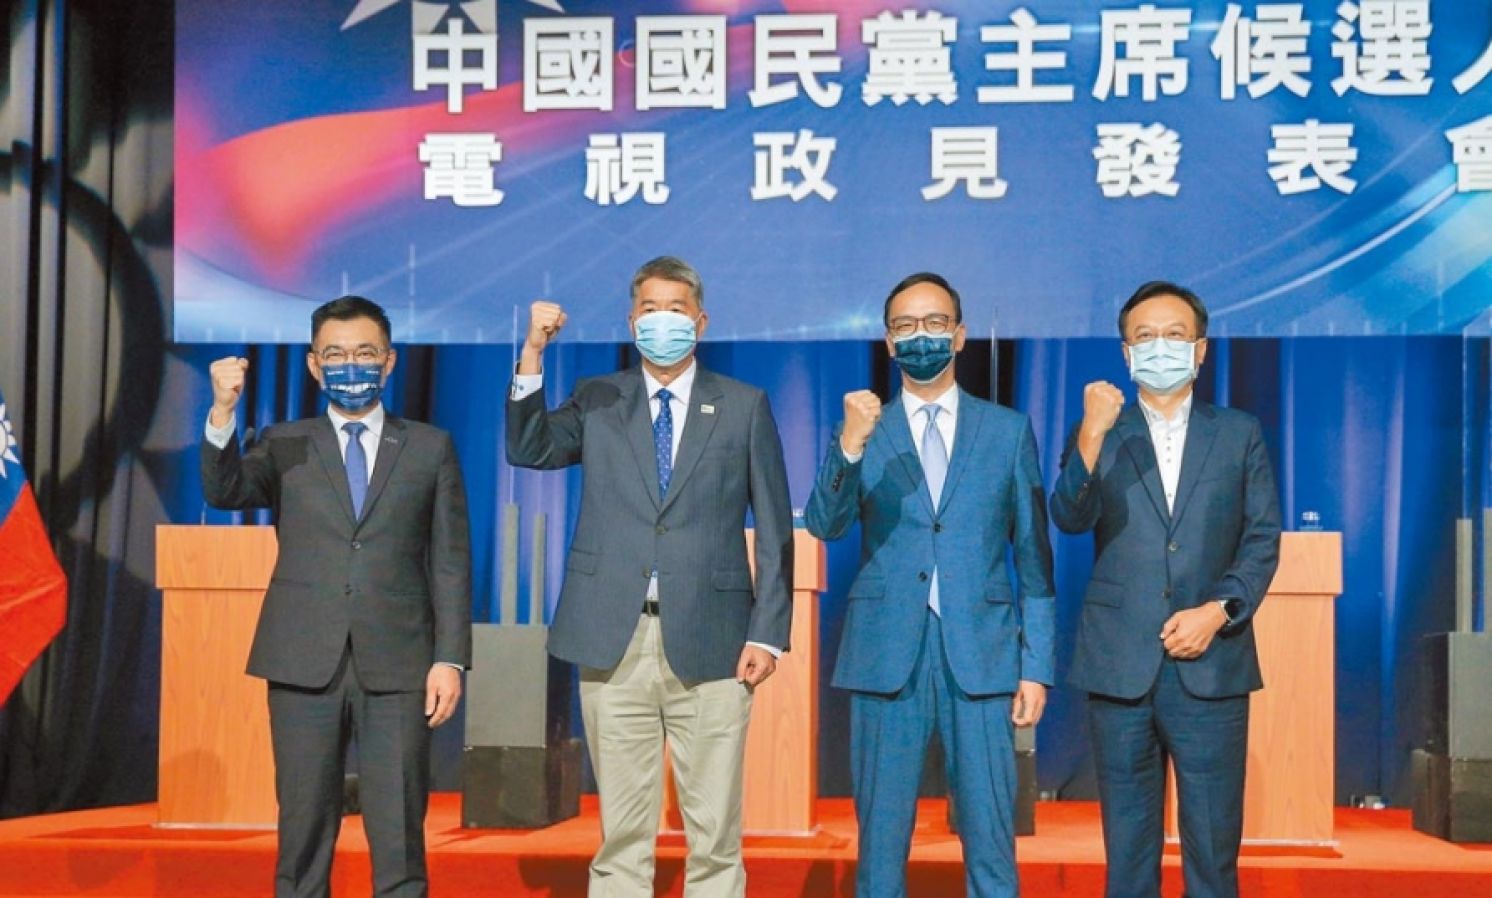 Candidates for KMT Chairman Emphasize Cross-Strait Relations